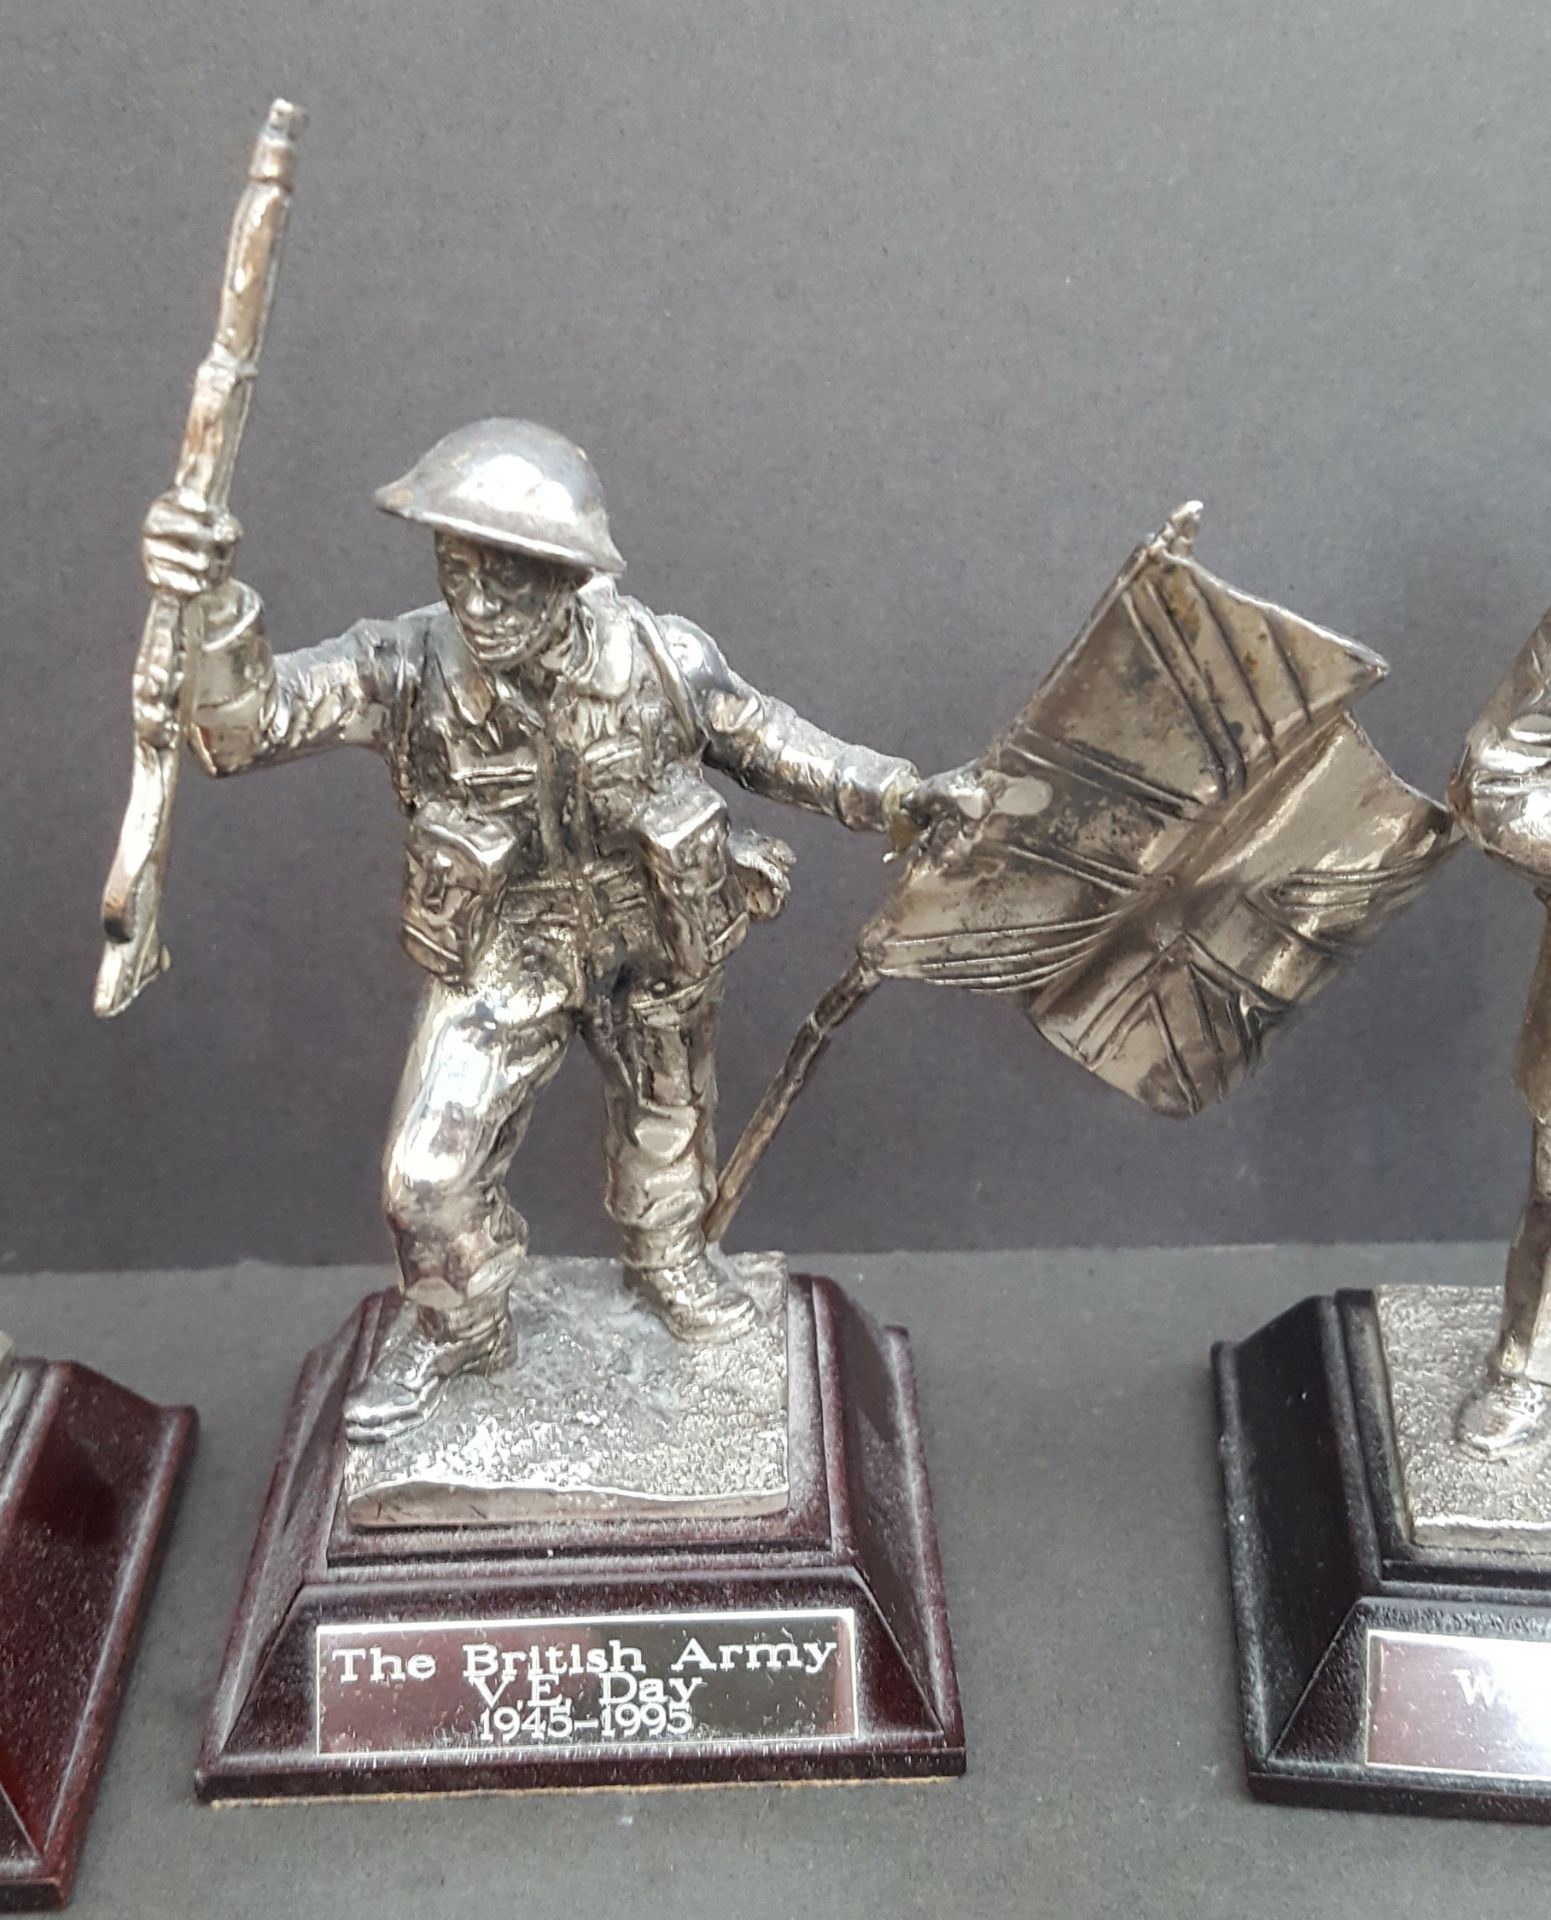 6 Vintage Royal Hampshire Pewter Military Figures Includes Churchill Paratrooper & Battle of Britain - Image 3 of 7